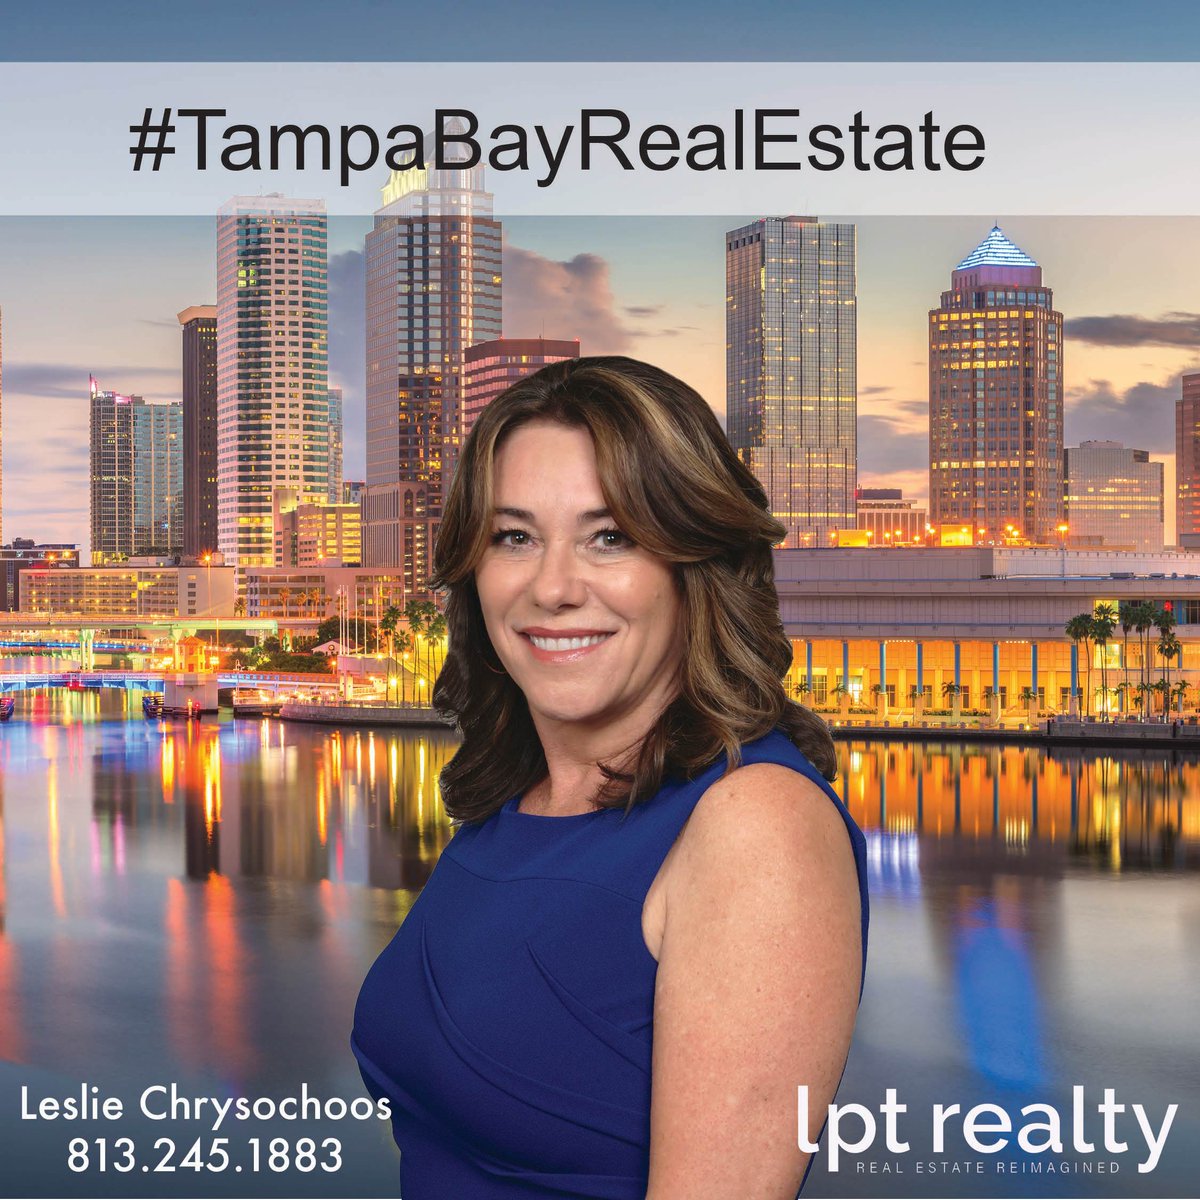 I'm your Tampa Bay real estate resource!
Call or text me at 813-245-1883 and let's chat.

#realestate #luxuryhomes #tampabayhomes #lptrealty #LptMagic #RealEstateReimagined #lptsocials #tampahomefinders #tamparealtor #813realtor #tampabay #realestateagent #relocatetoFlorida...